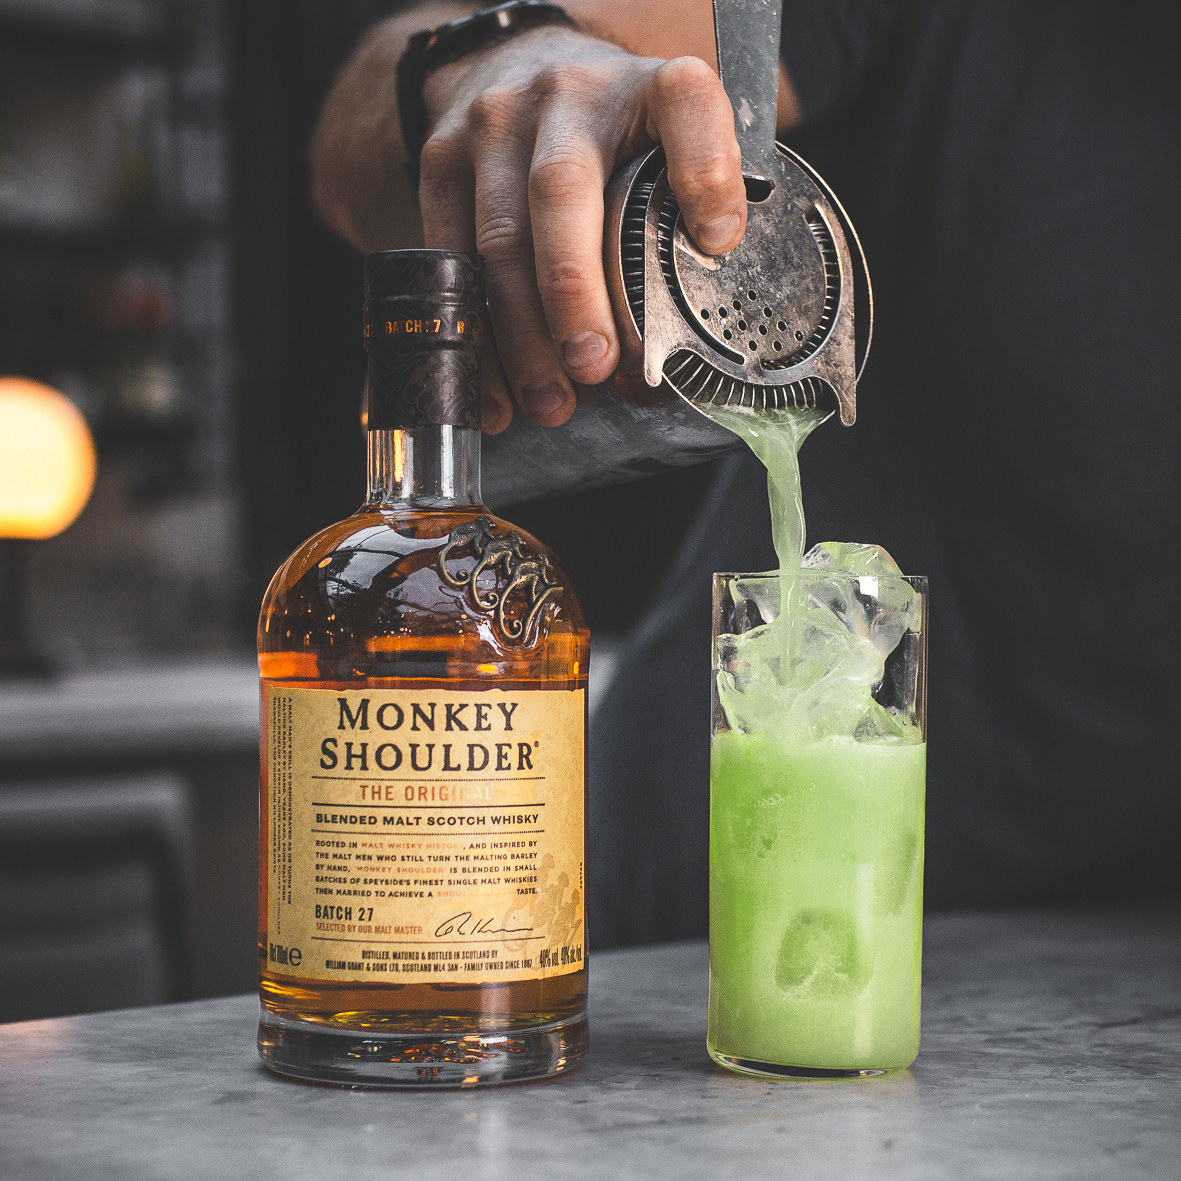 green cocktail being strained into a glass next to a bottle of monkey shoulder whisky